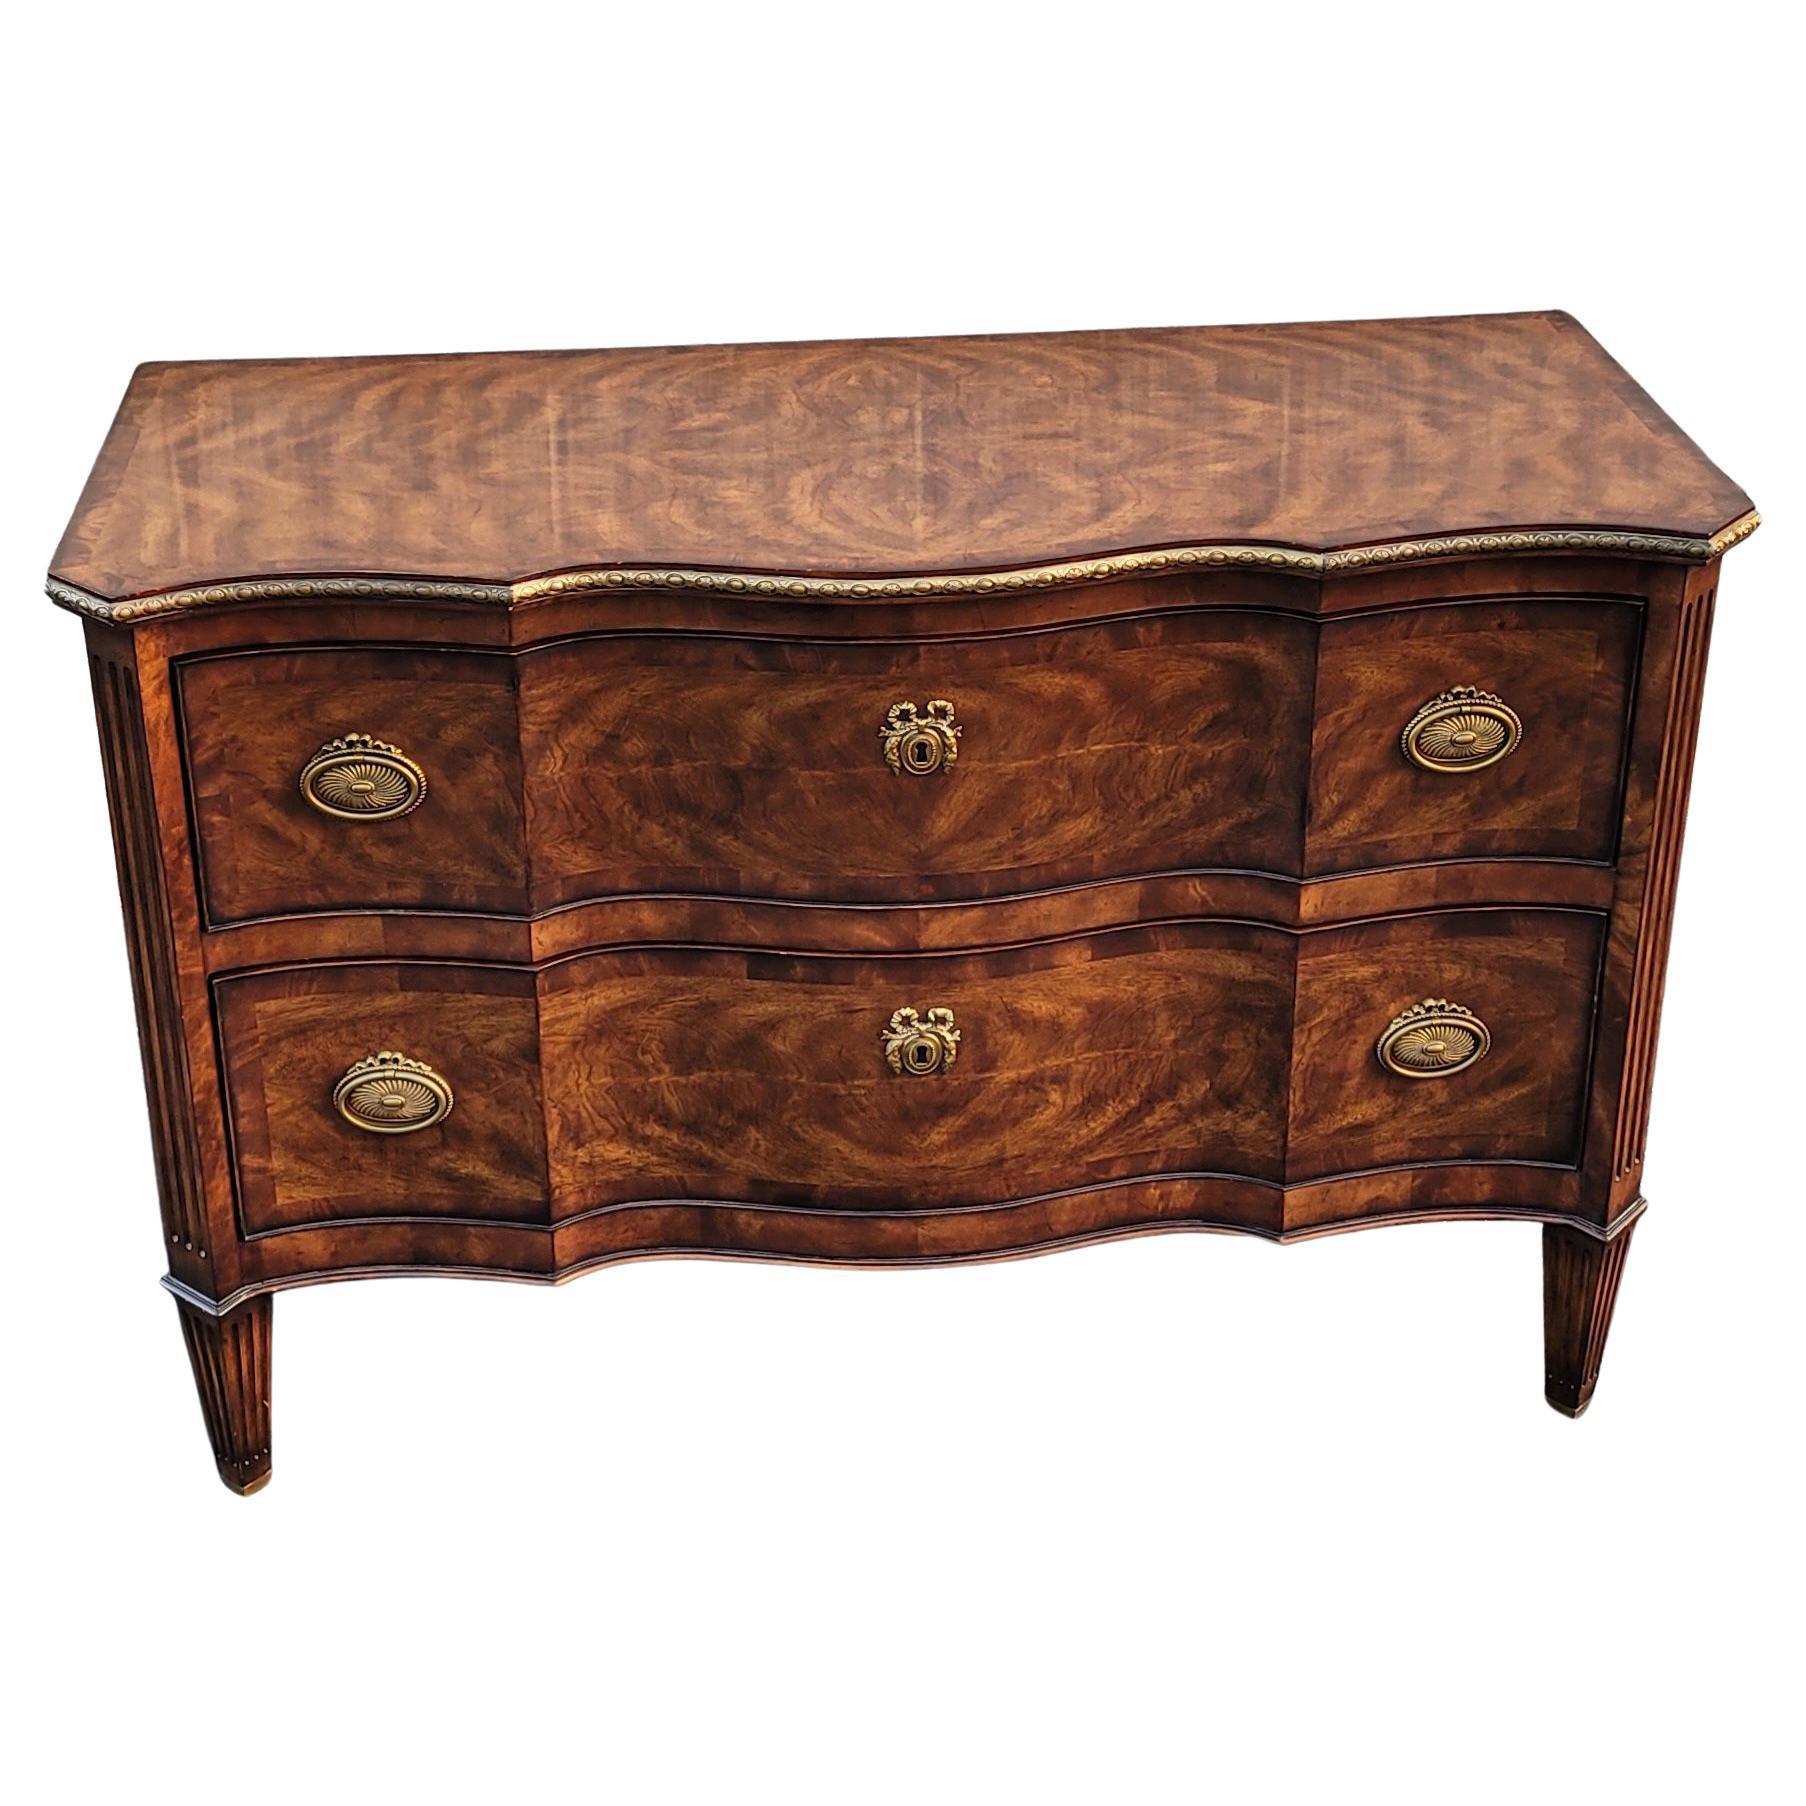 A rare, exquisite Theodore Alexander The India Silk collection Serpentine flame Mahogany & Giltwod Commode chest of drawers in excelent vintage condition. 
Cast brass drawer pulls and gilt wood ornate top edges. Flawlessly functionning mahogany